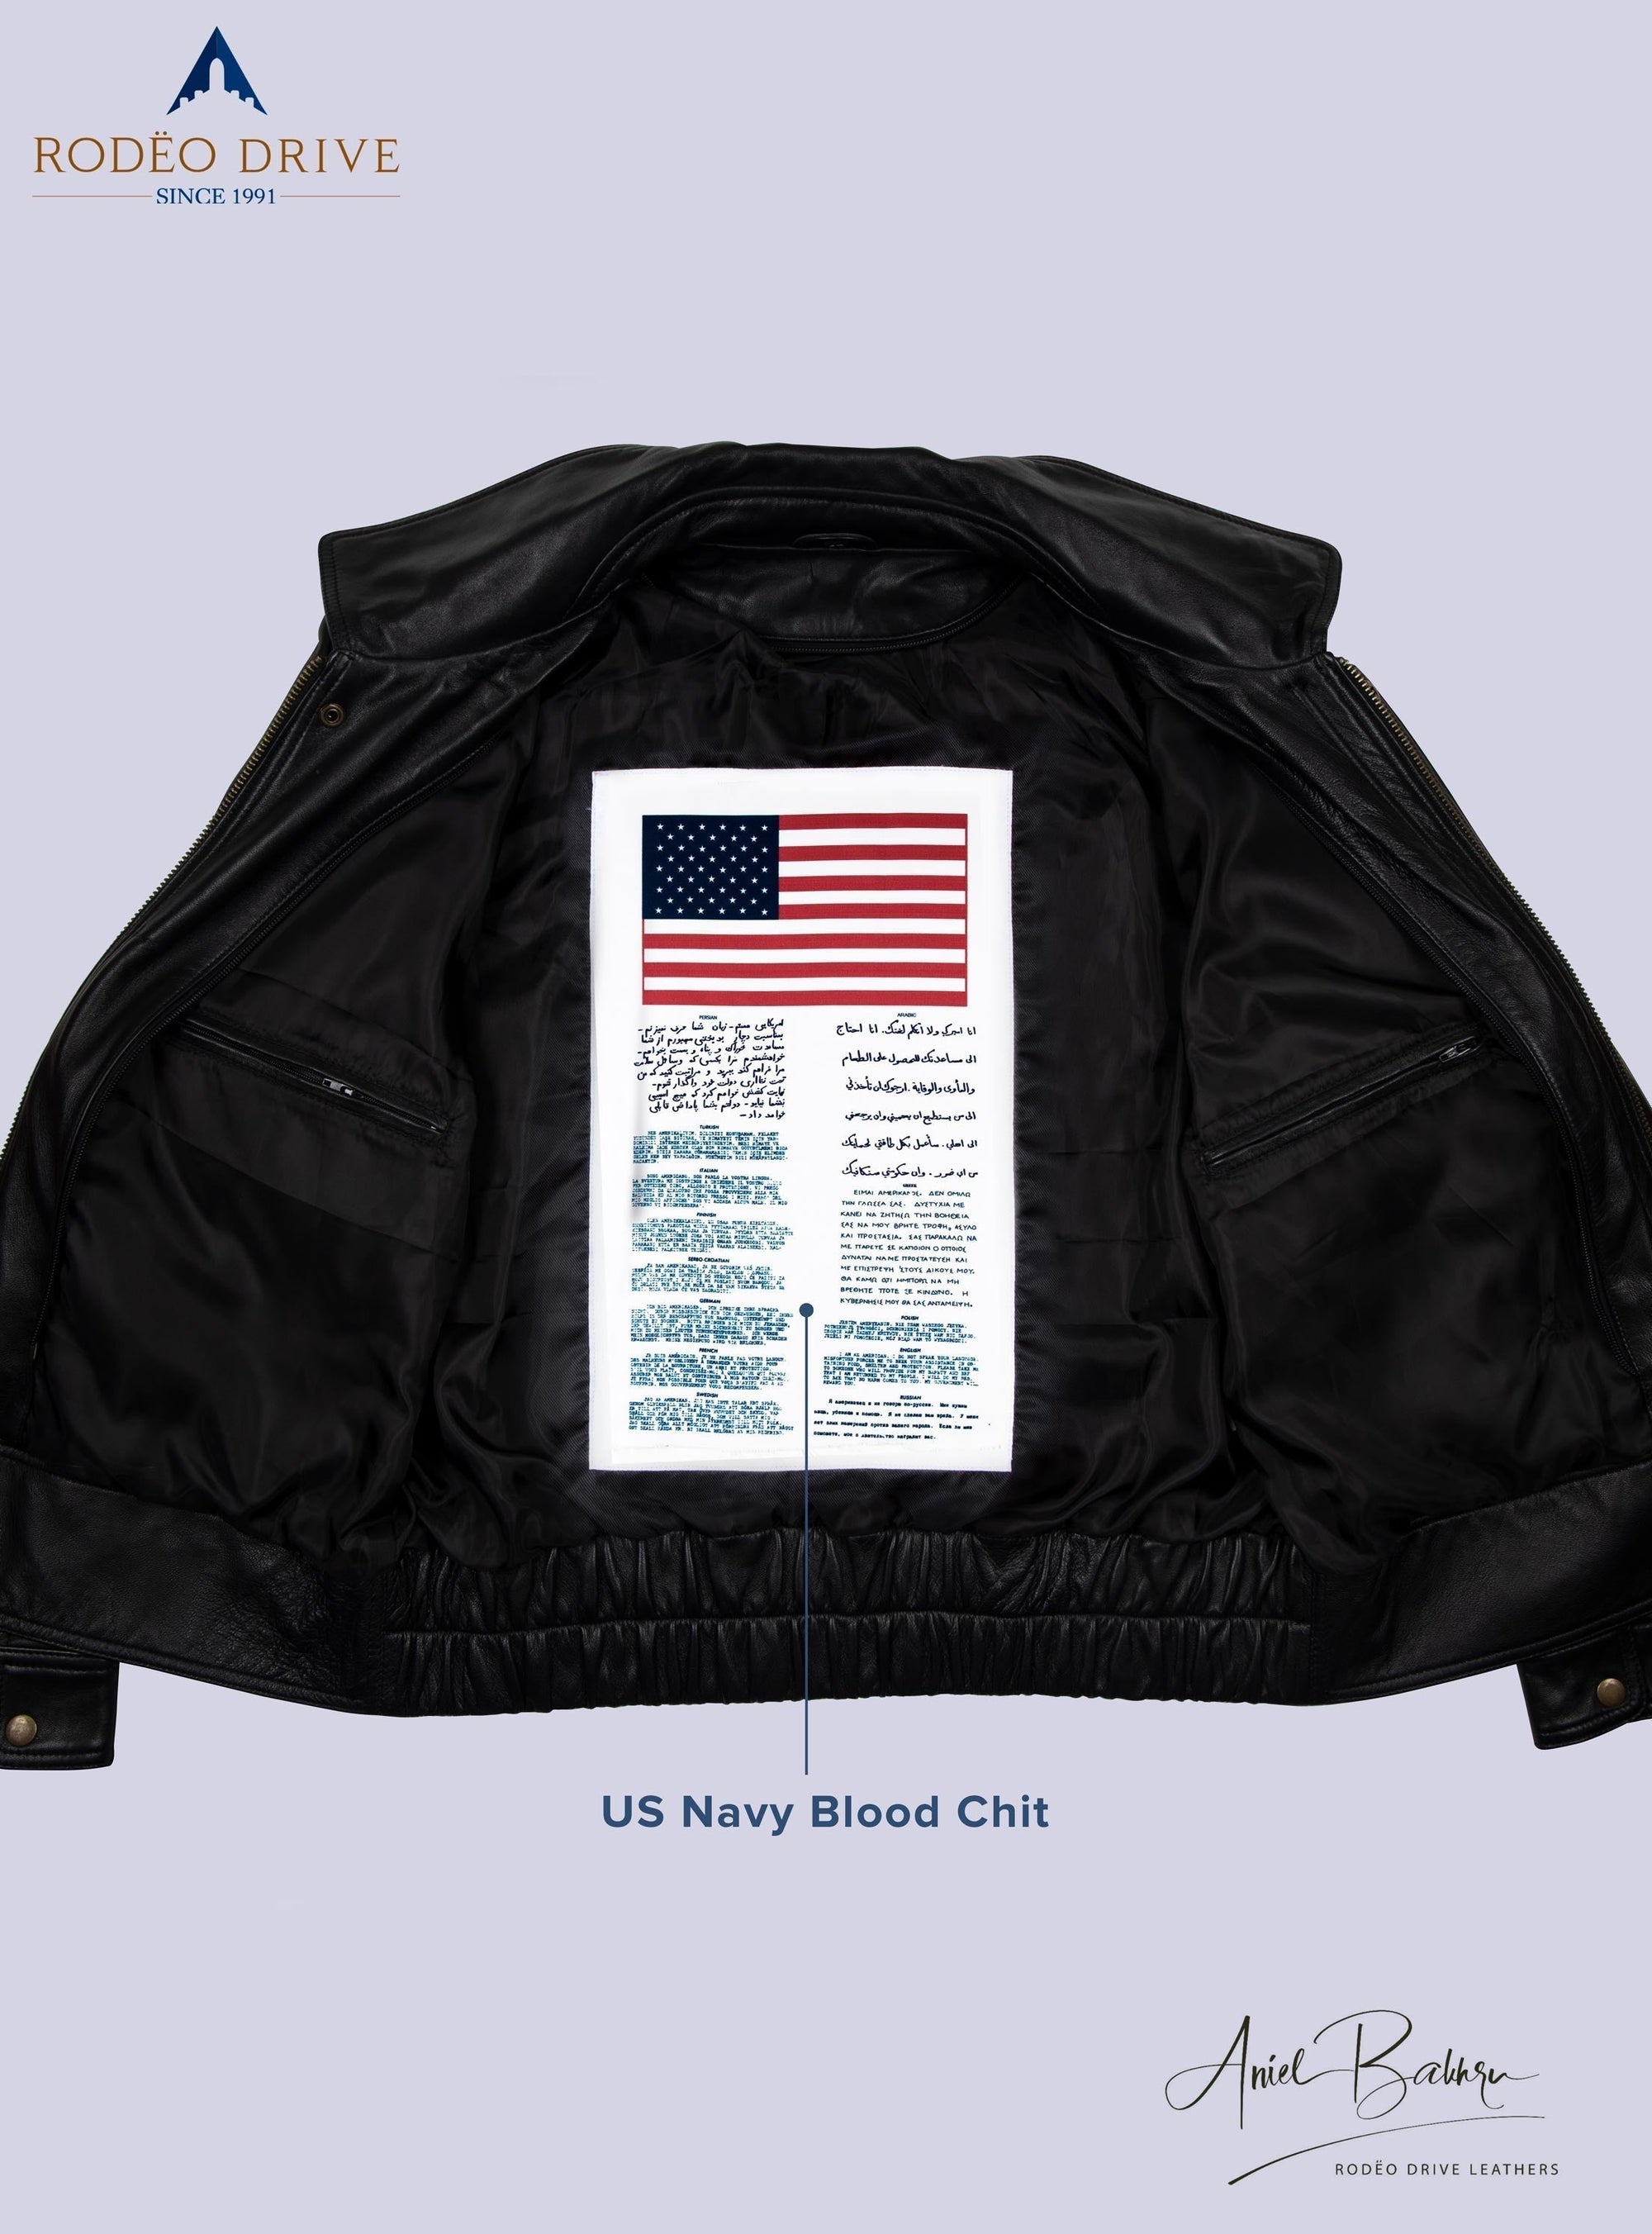 Inside image of united UNIFORM LEATHER JACKETS women with US Navy blood chit sewed inside